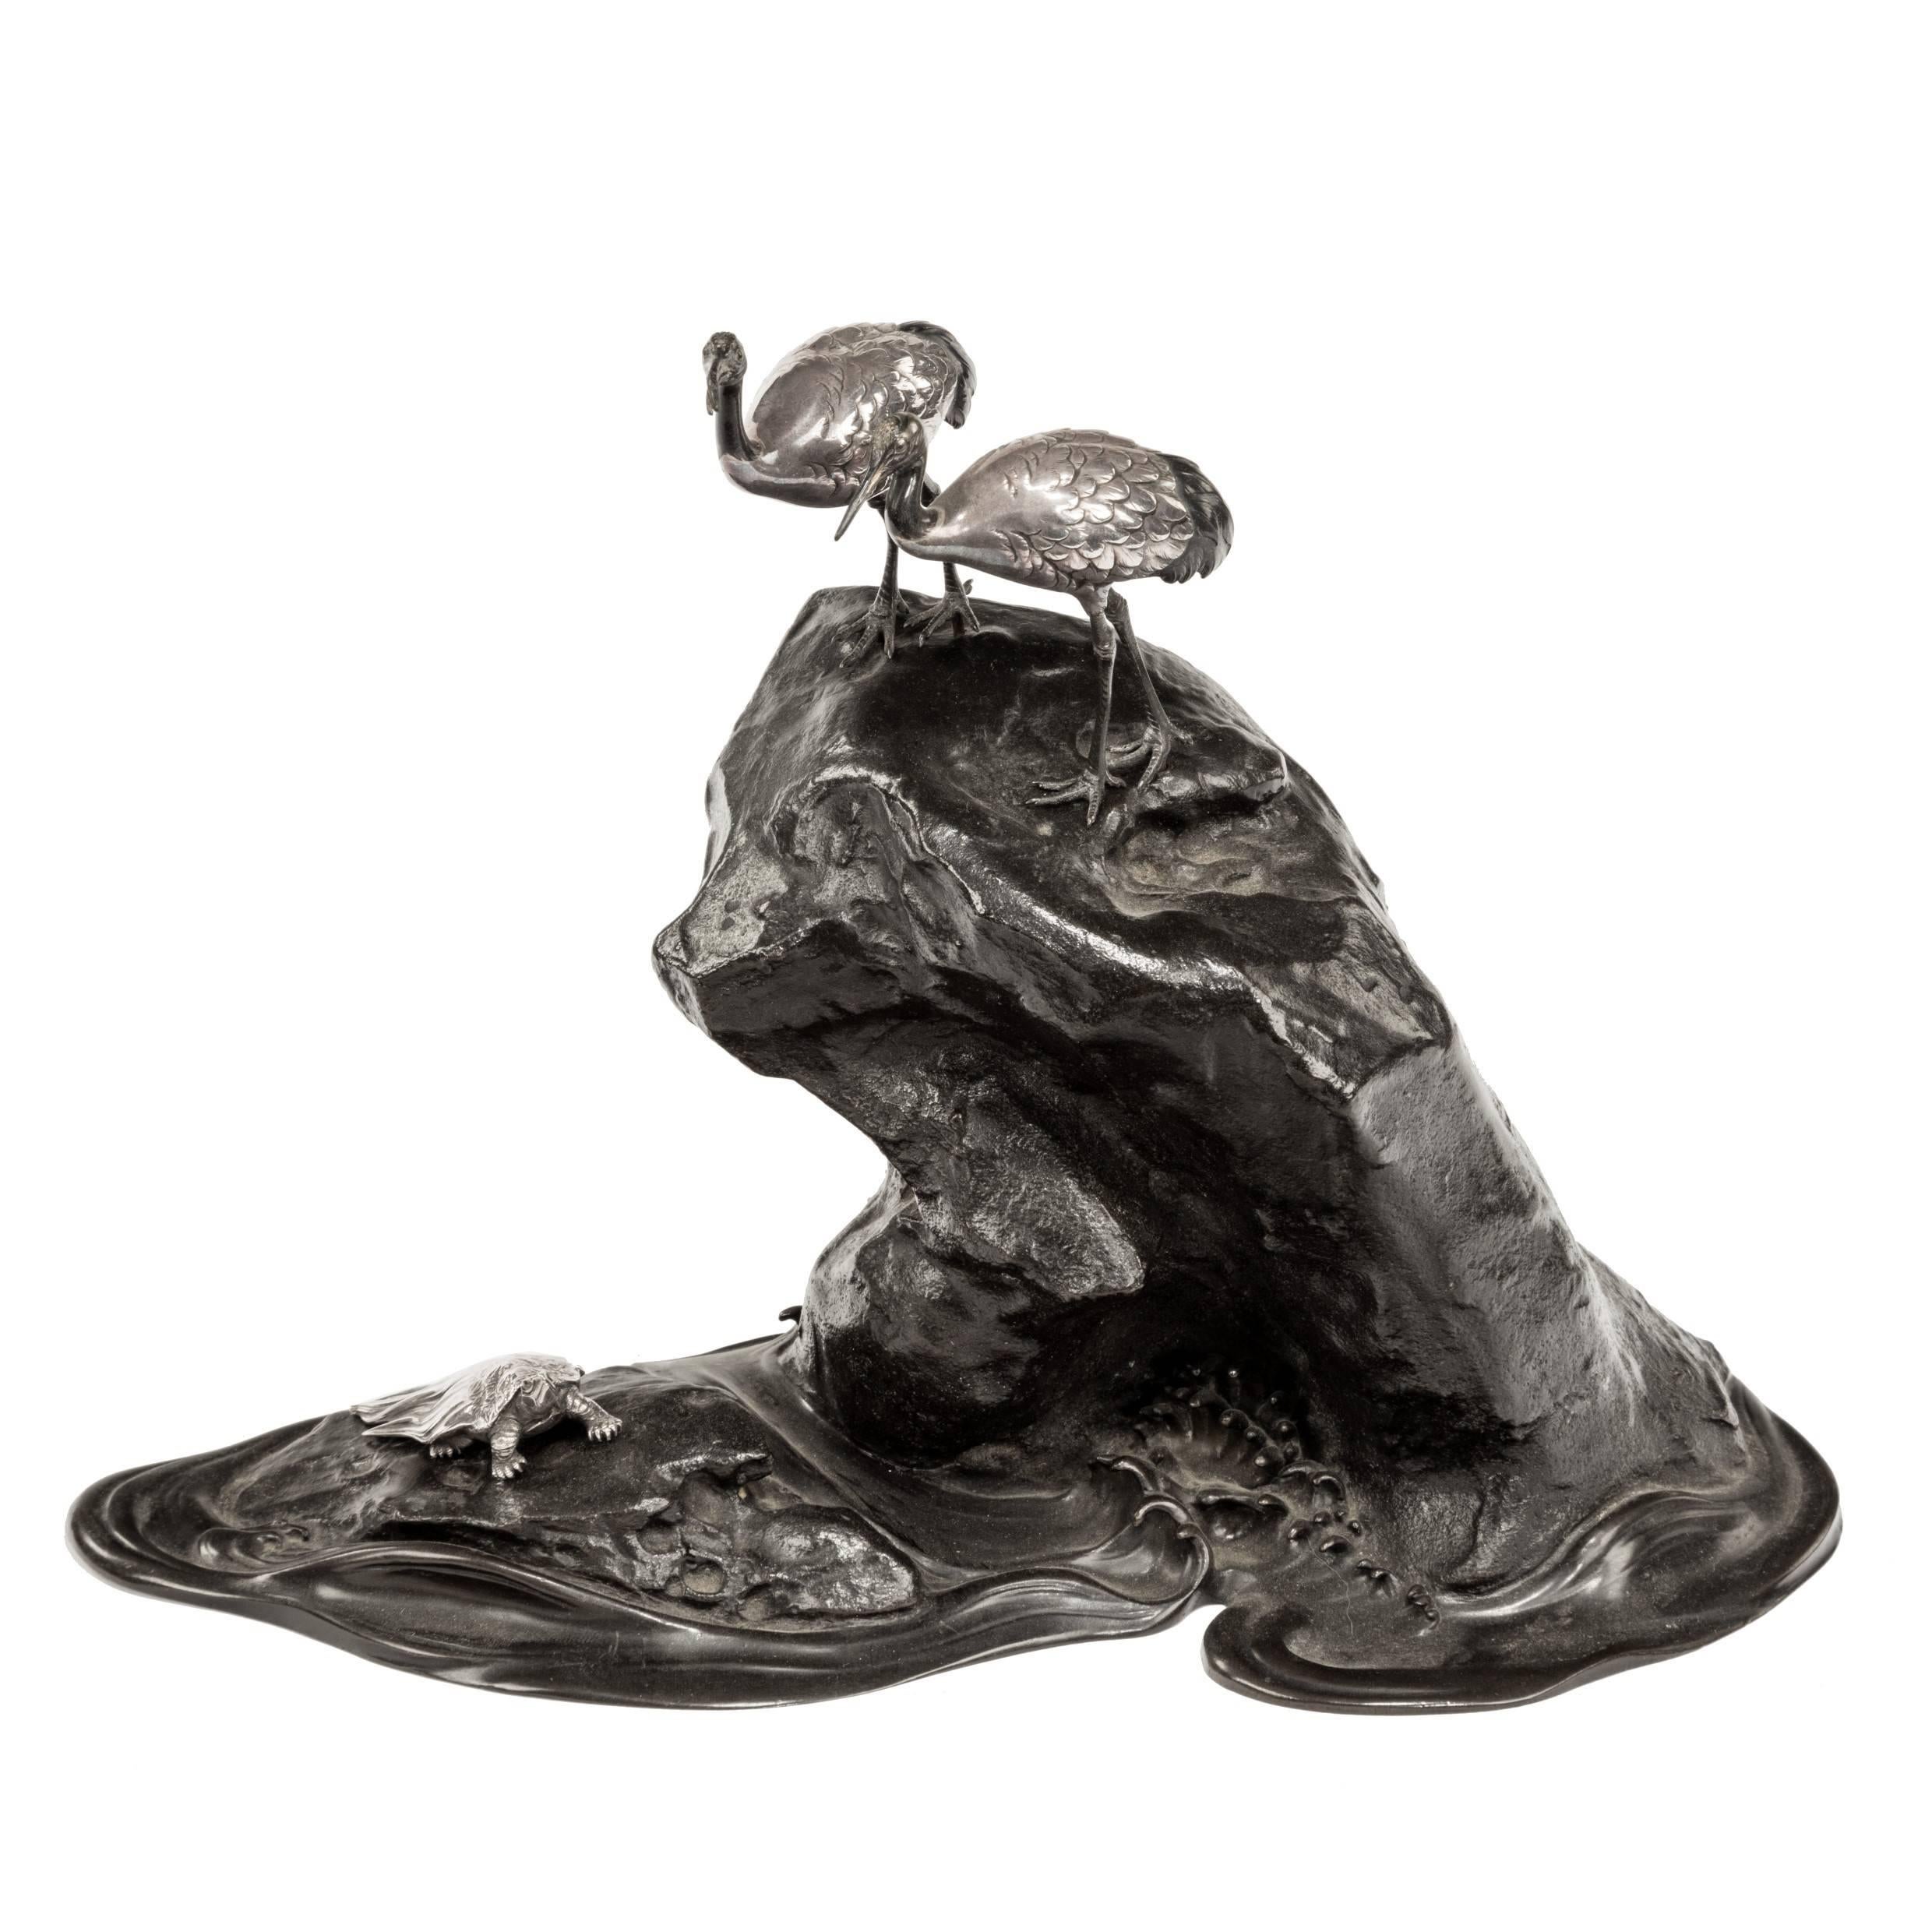 Meiji period bronze okimono of a large rock with two detached silver cranes perched upon it and a detached silver minogame in the rocky pools below. 

Footnote: 
Both minogame and cranes are auspicious creatures in Japanese lore as they symbolize